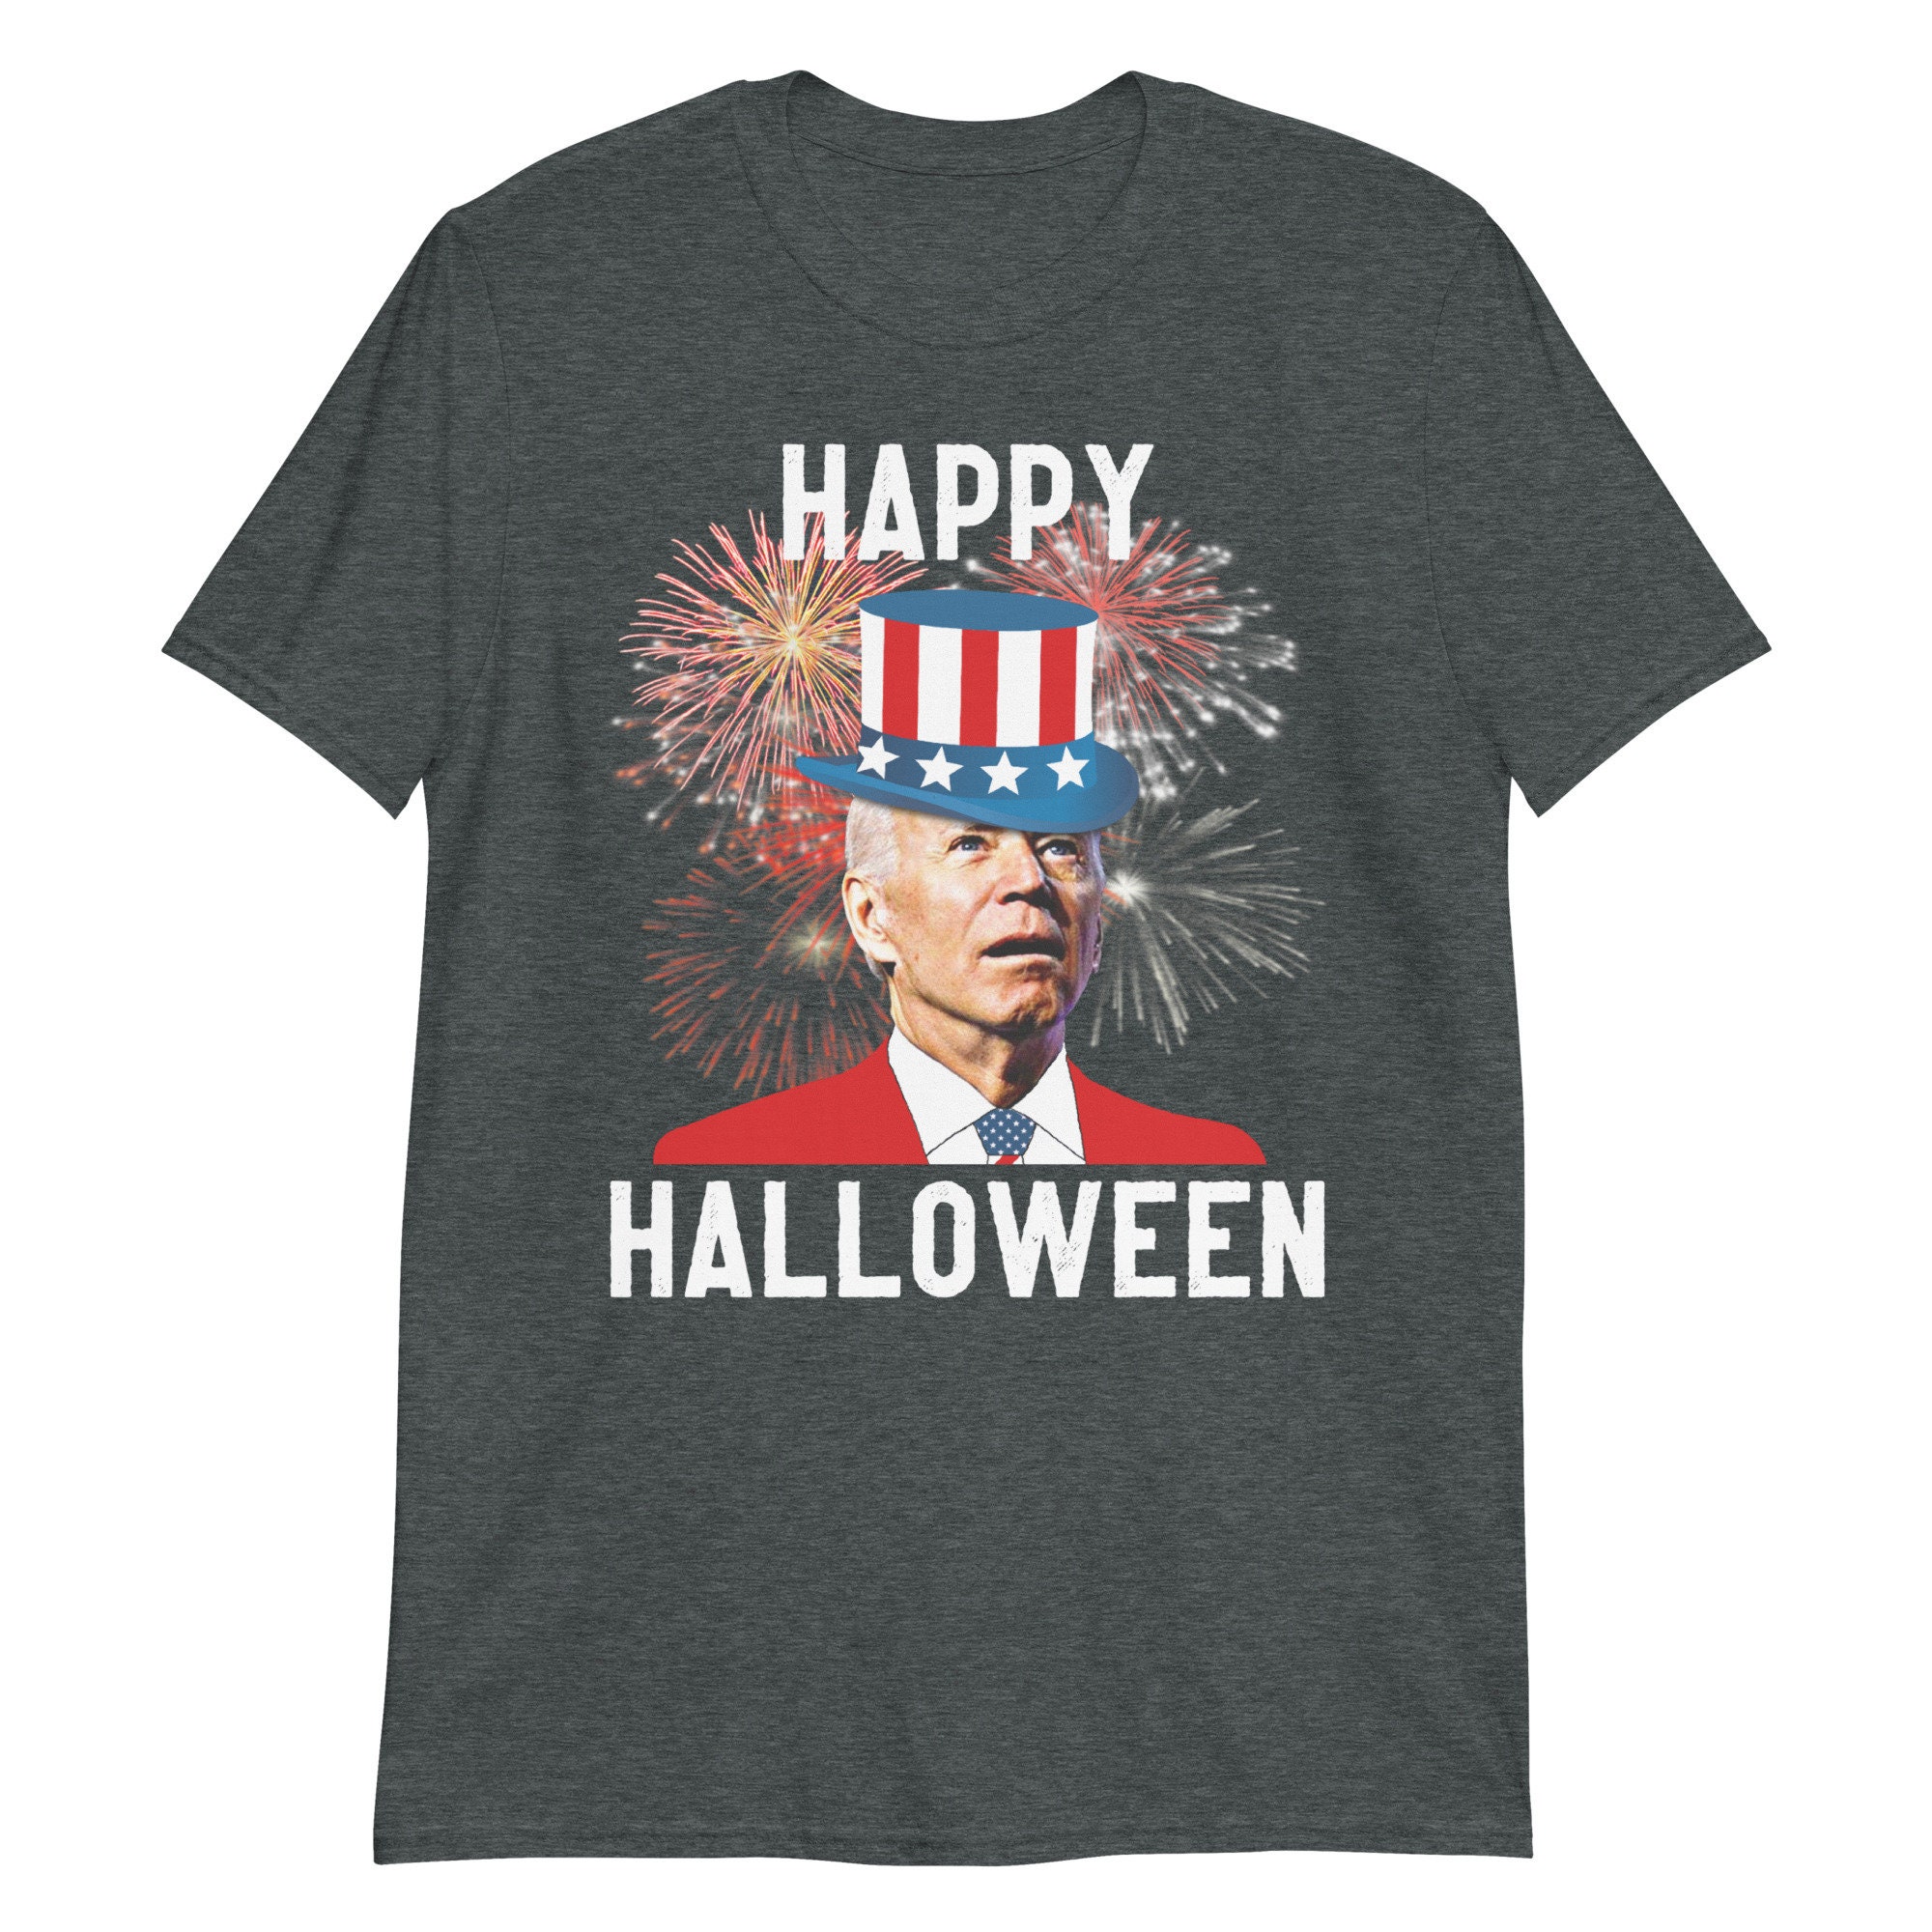 Discover Funny Biden Fourth Of July Shirt, Funny 4th Of July Shirt, Biden Halloween Shirt